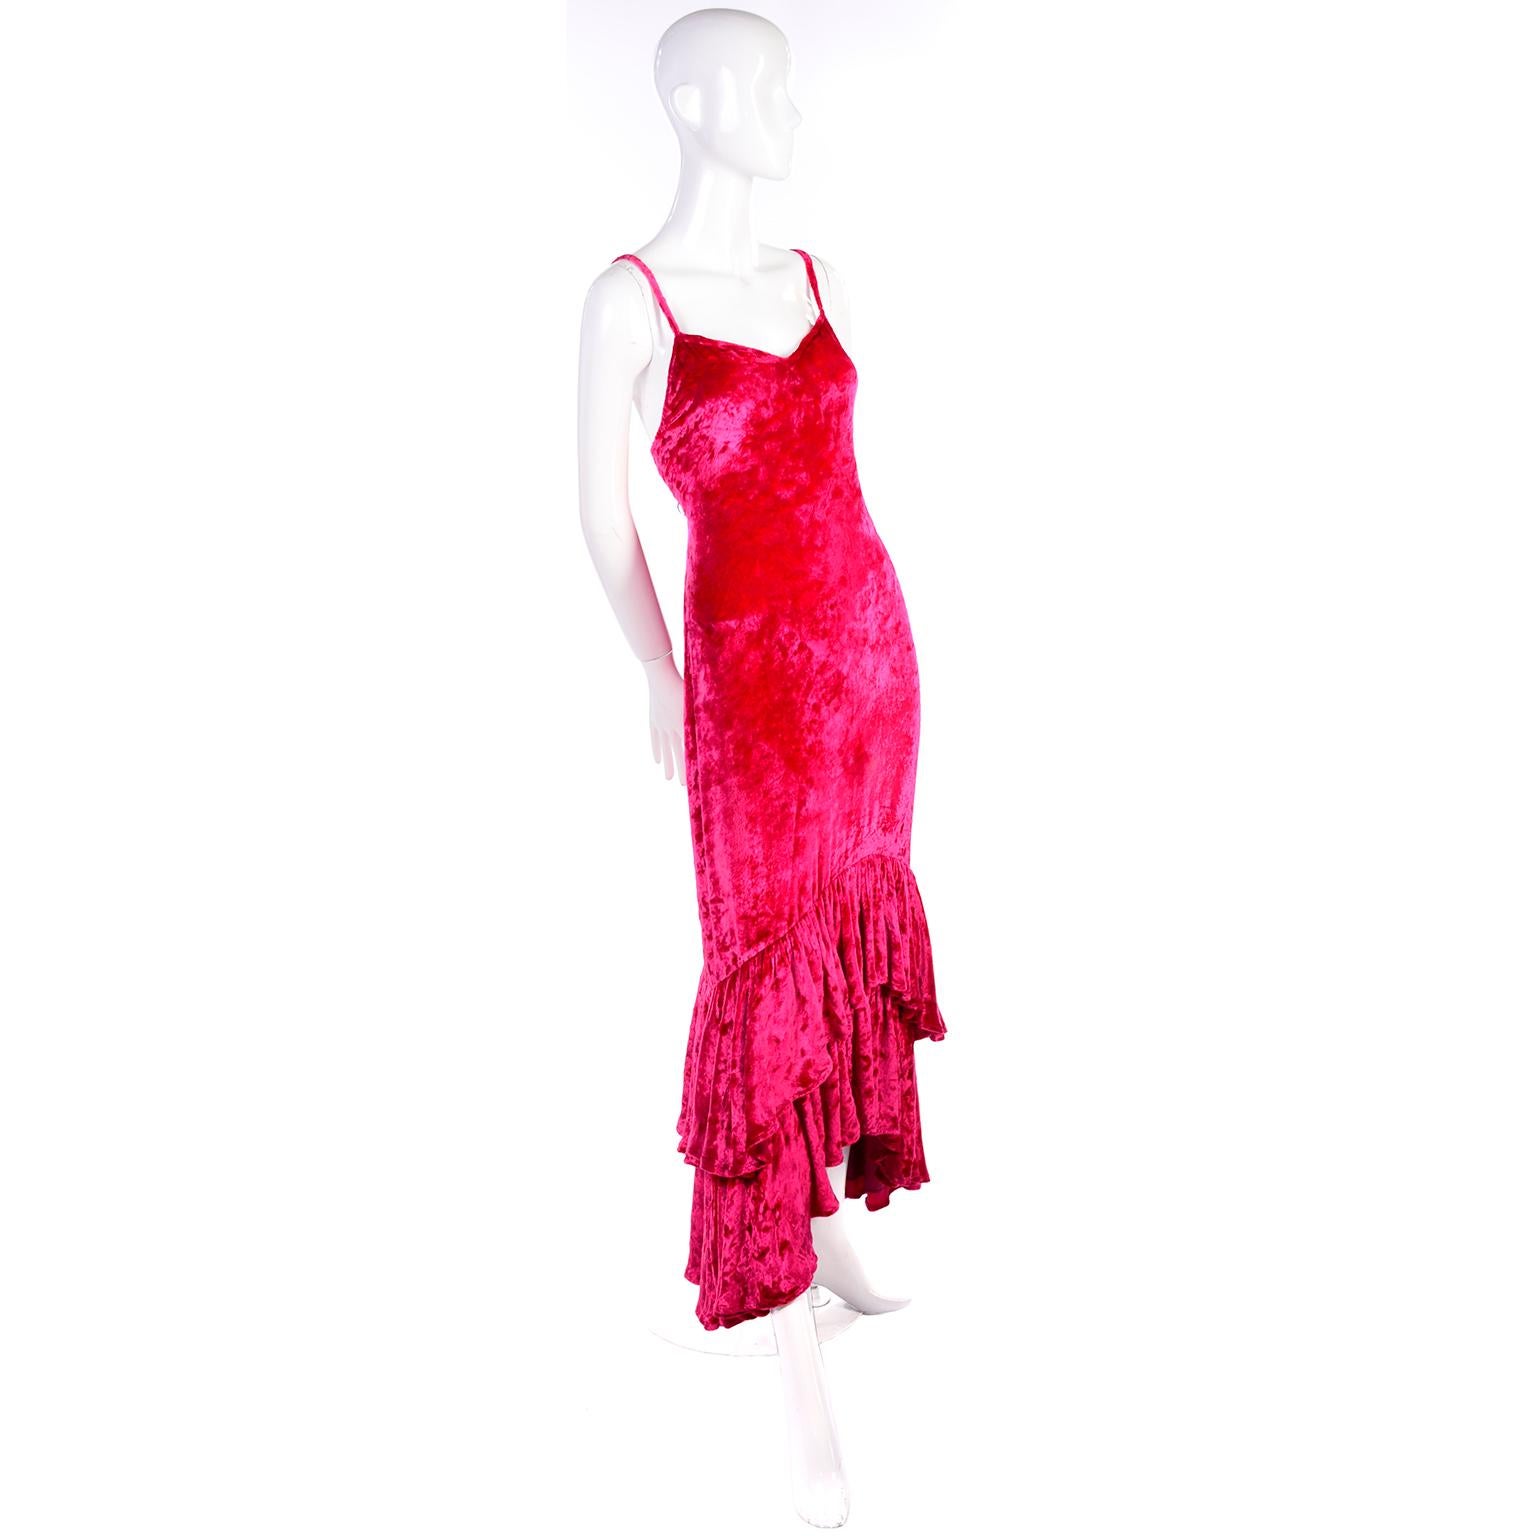 This is a gorgeous raspberry pink crushed velvet Sonia Rykiel vintage dress with a unique double layered ruffled high to low hem. It has spaghetti straps and buttons up the back with velvet covered buttons. It has one smudge in the front, but it is